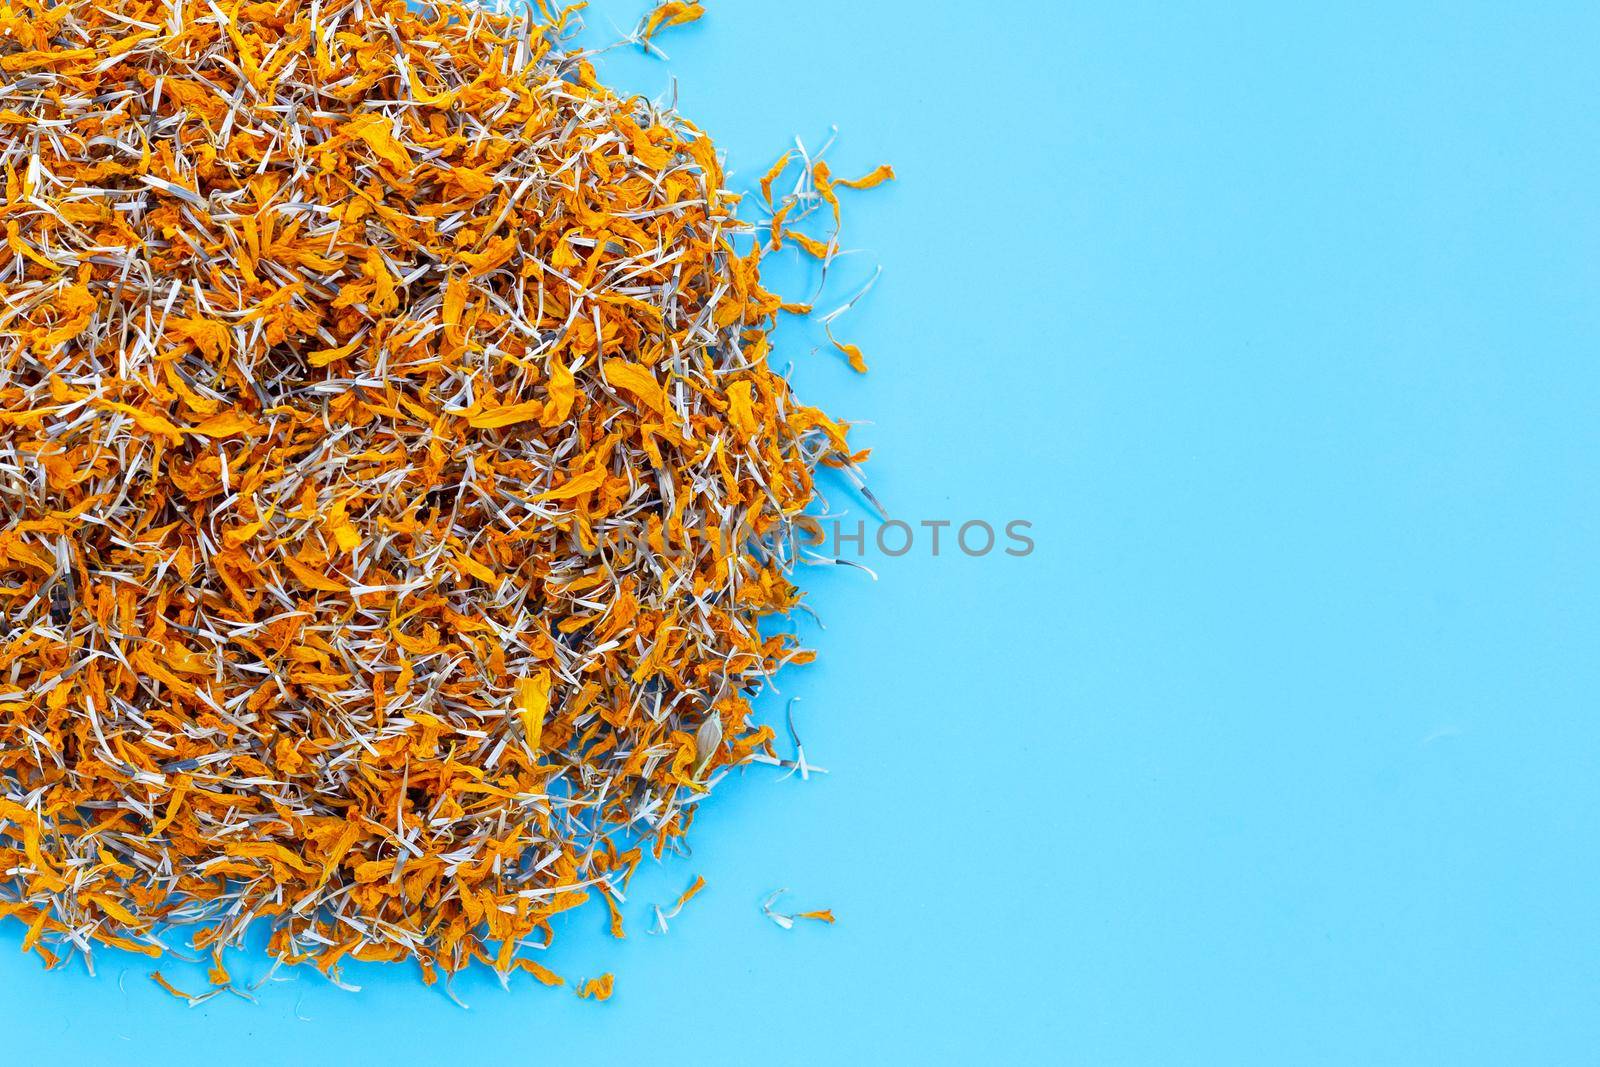 Dried marigold flower petals on blue background by Bowonpat